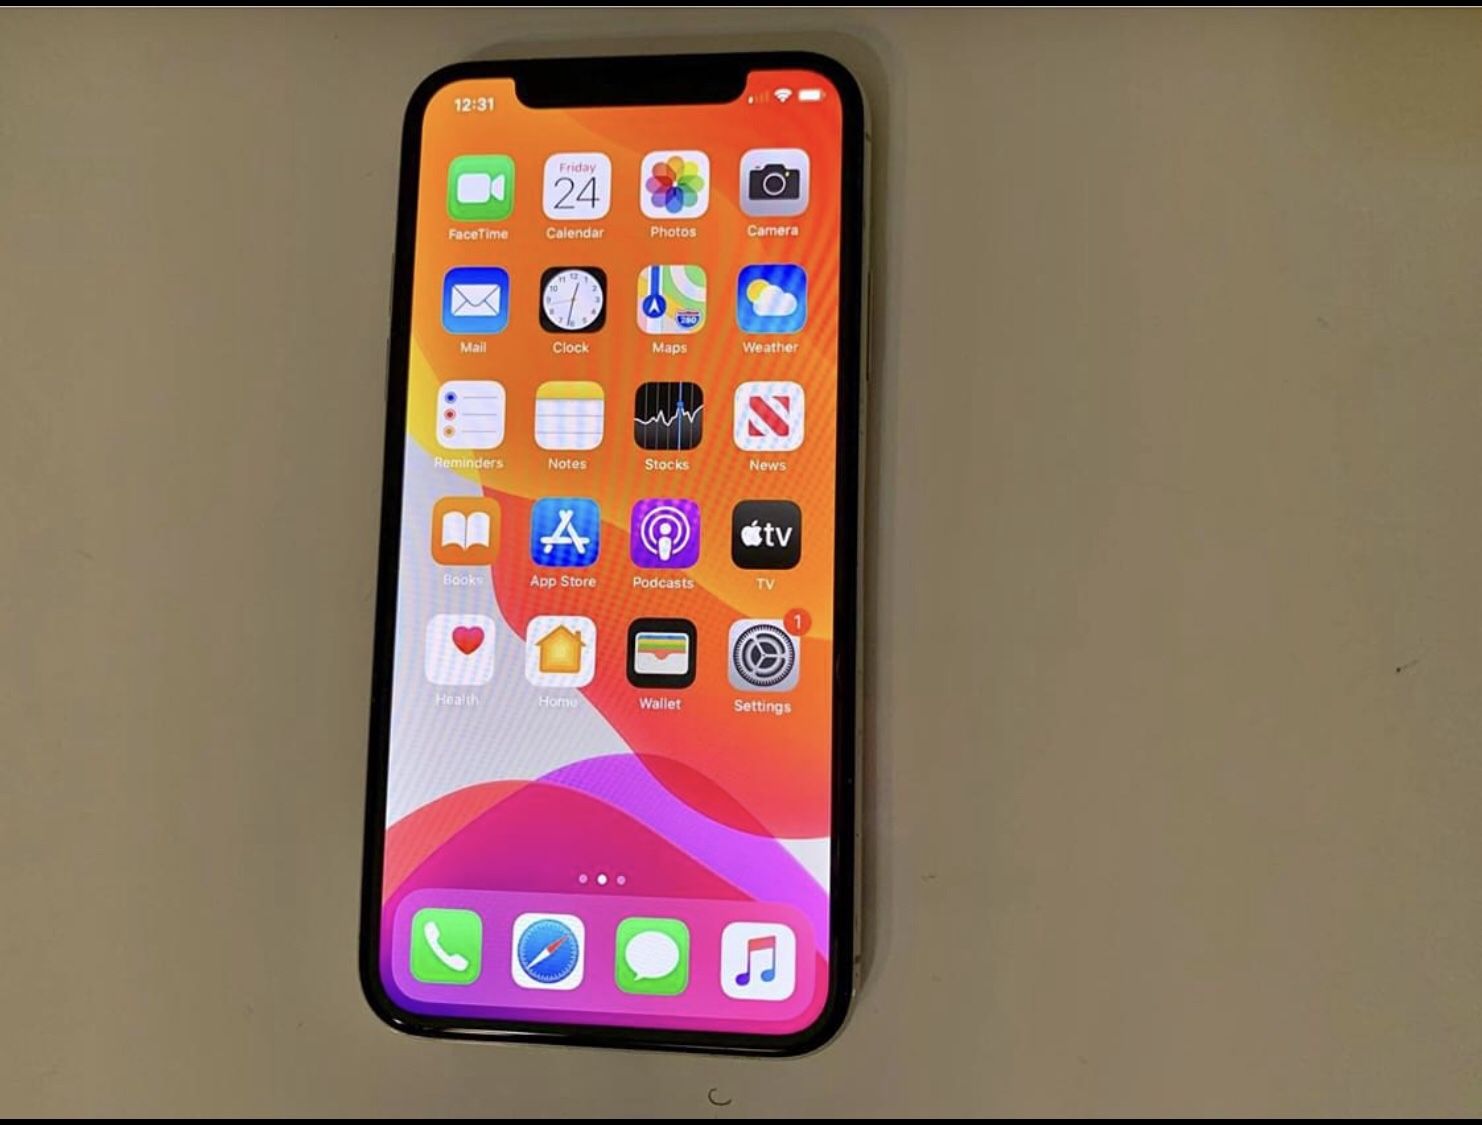 iPhone X for att and cricket